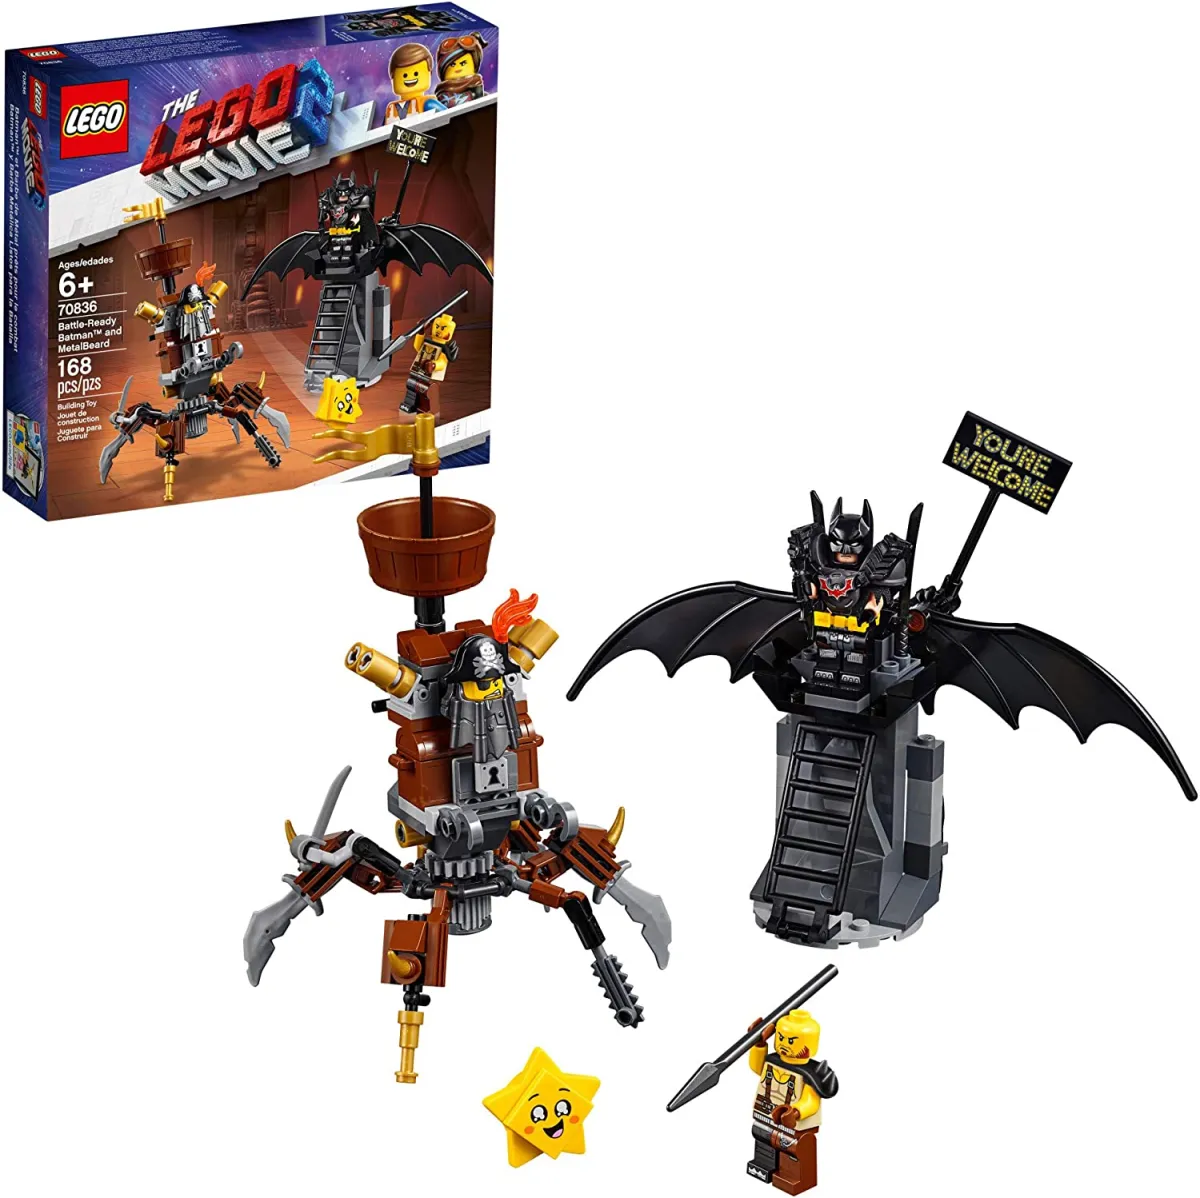 From Denmark】LEGO The Lego Movie 2 Battle Batman and Metal Beard 70836  Construction Set, Mechanical Toy for Superheroes and Pirates (168 pieces)  (Manufacturer discontinued production) Genuine Guarantee 